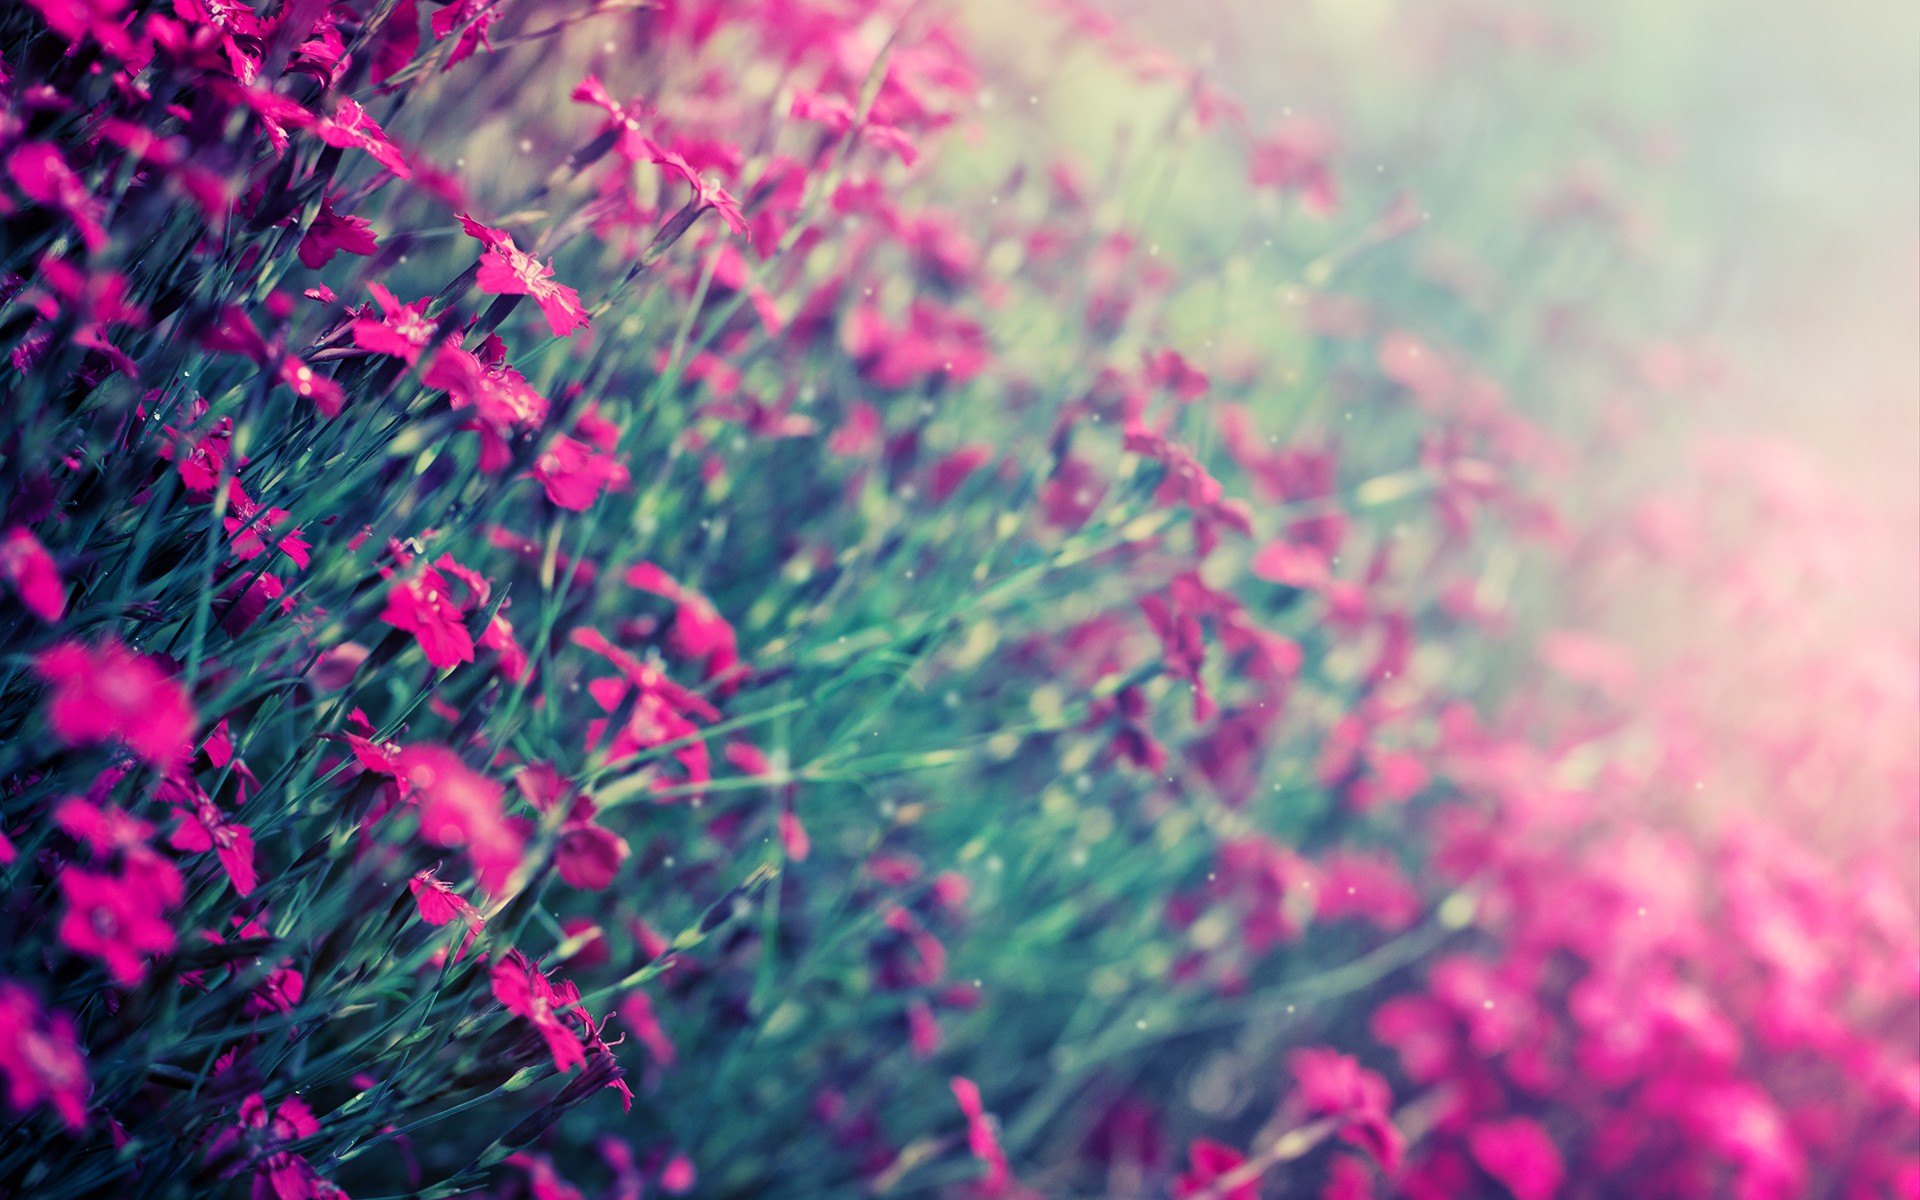 Image Teal And Pink Flowers Pc Android iPhone iPad Wallpaper